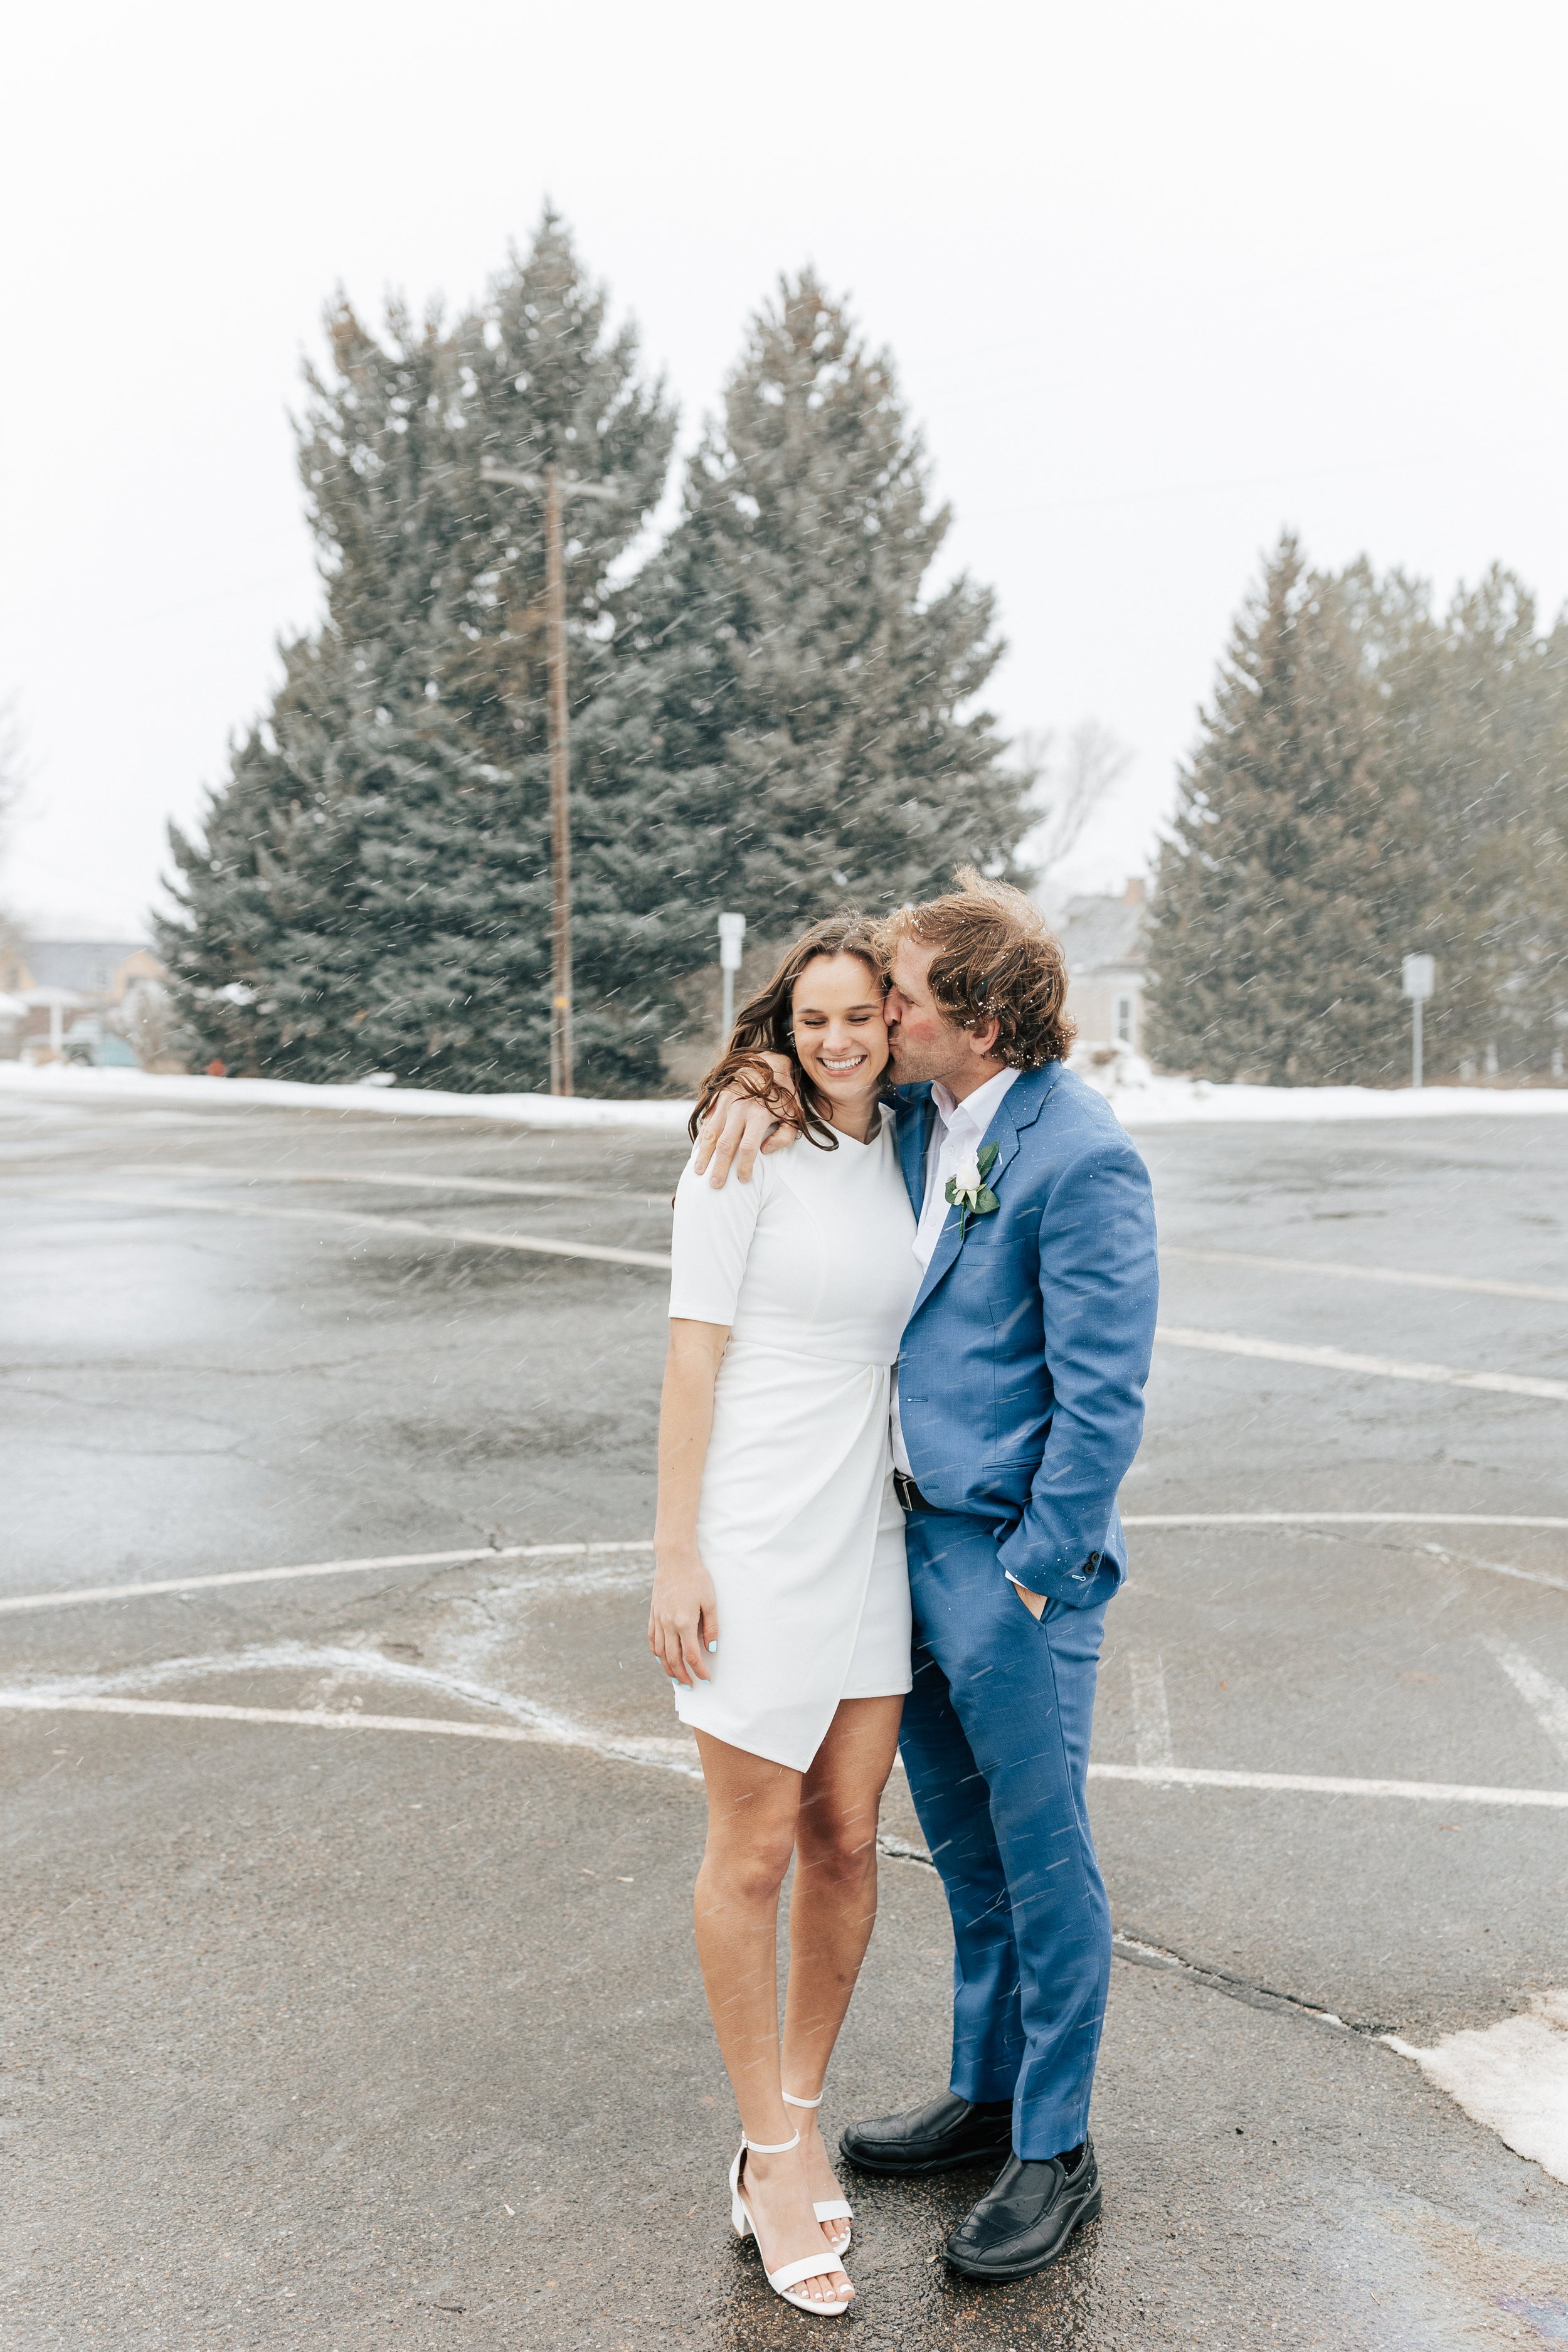  Beautiful winter wedding photos casual wedding simple courthouse elopement in coalville utah by emily jenkins photo park city elopement photographer winter elopement mountain elope snowy street #elopement #parkcityutah #parkcity #parkcityelopement #